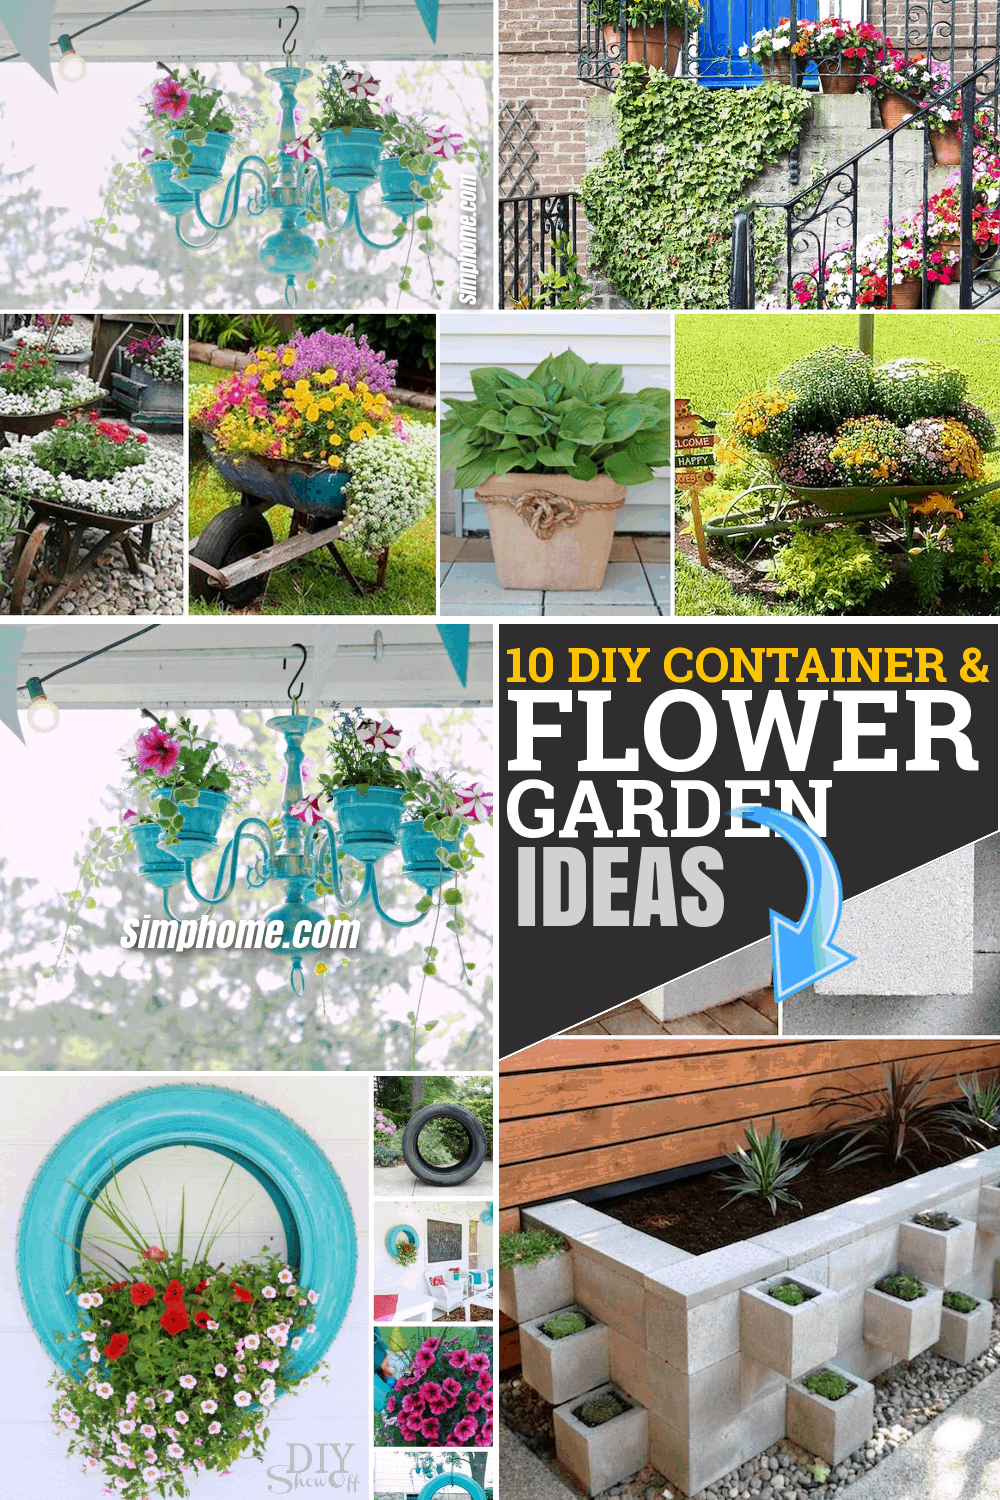 10 DIY flower garden ideas and containers via Simphome.com Featured pinterest image